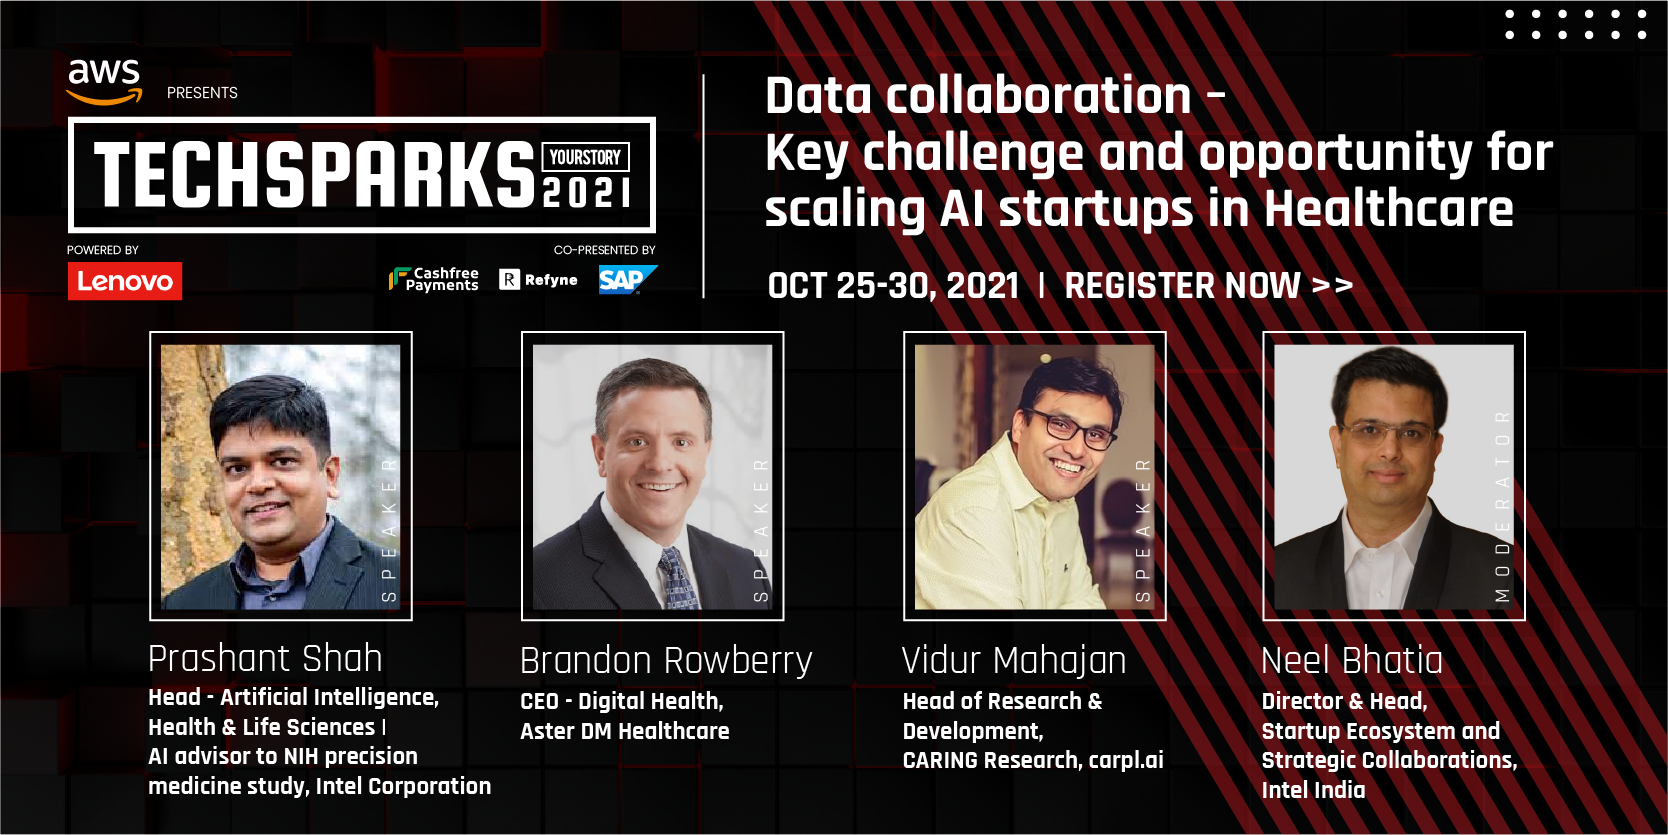 Data sharing is key to improving patient health outcomes, experts say at TechSparks 2021
